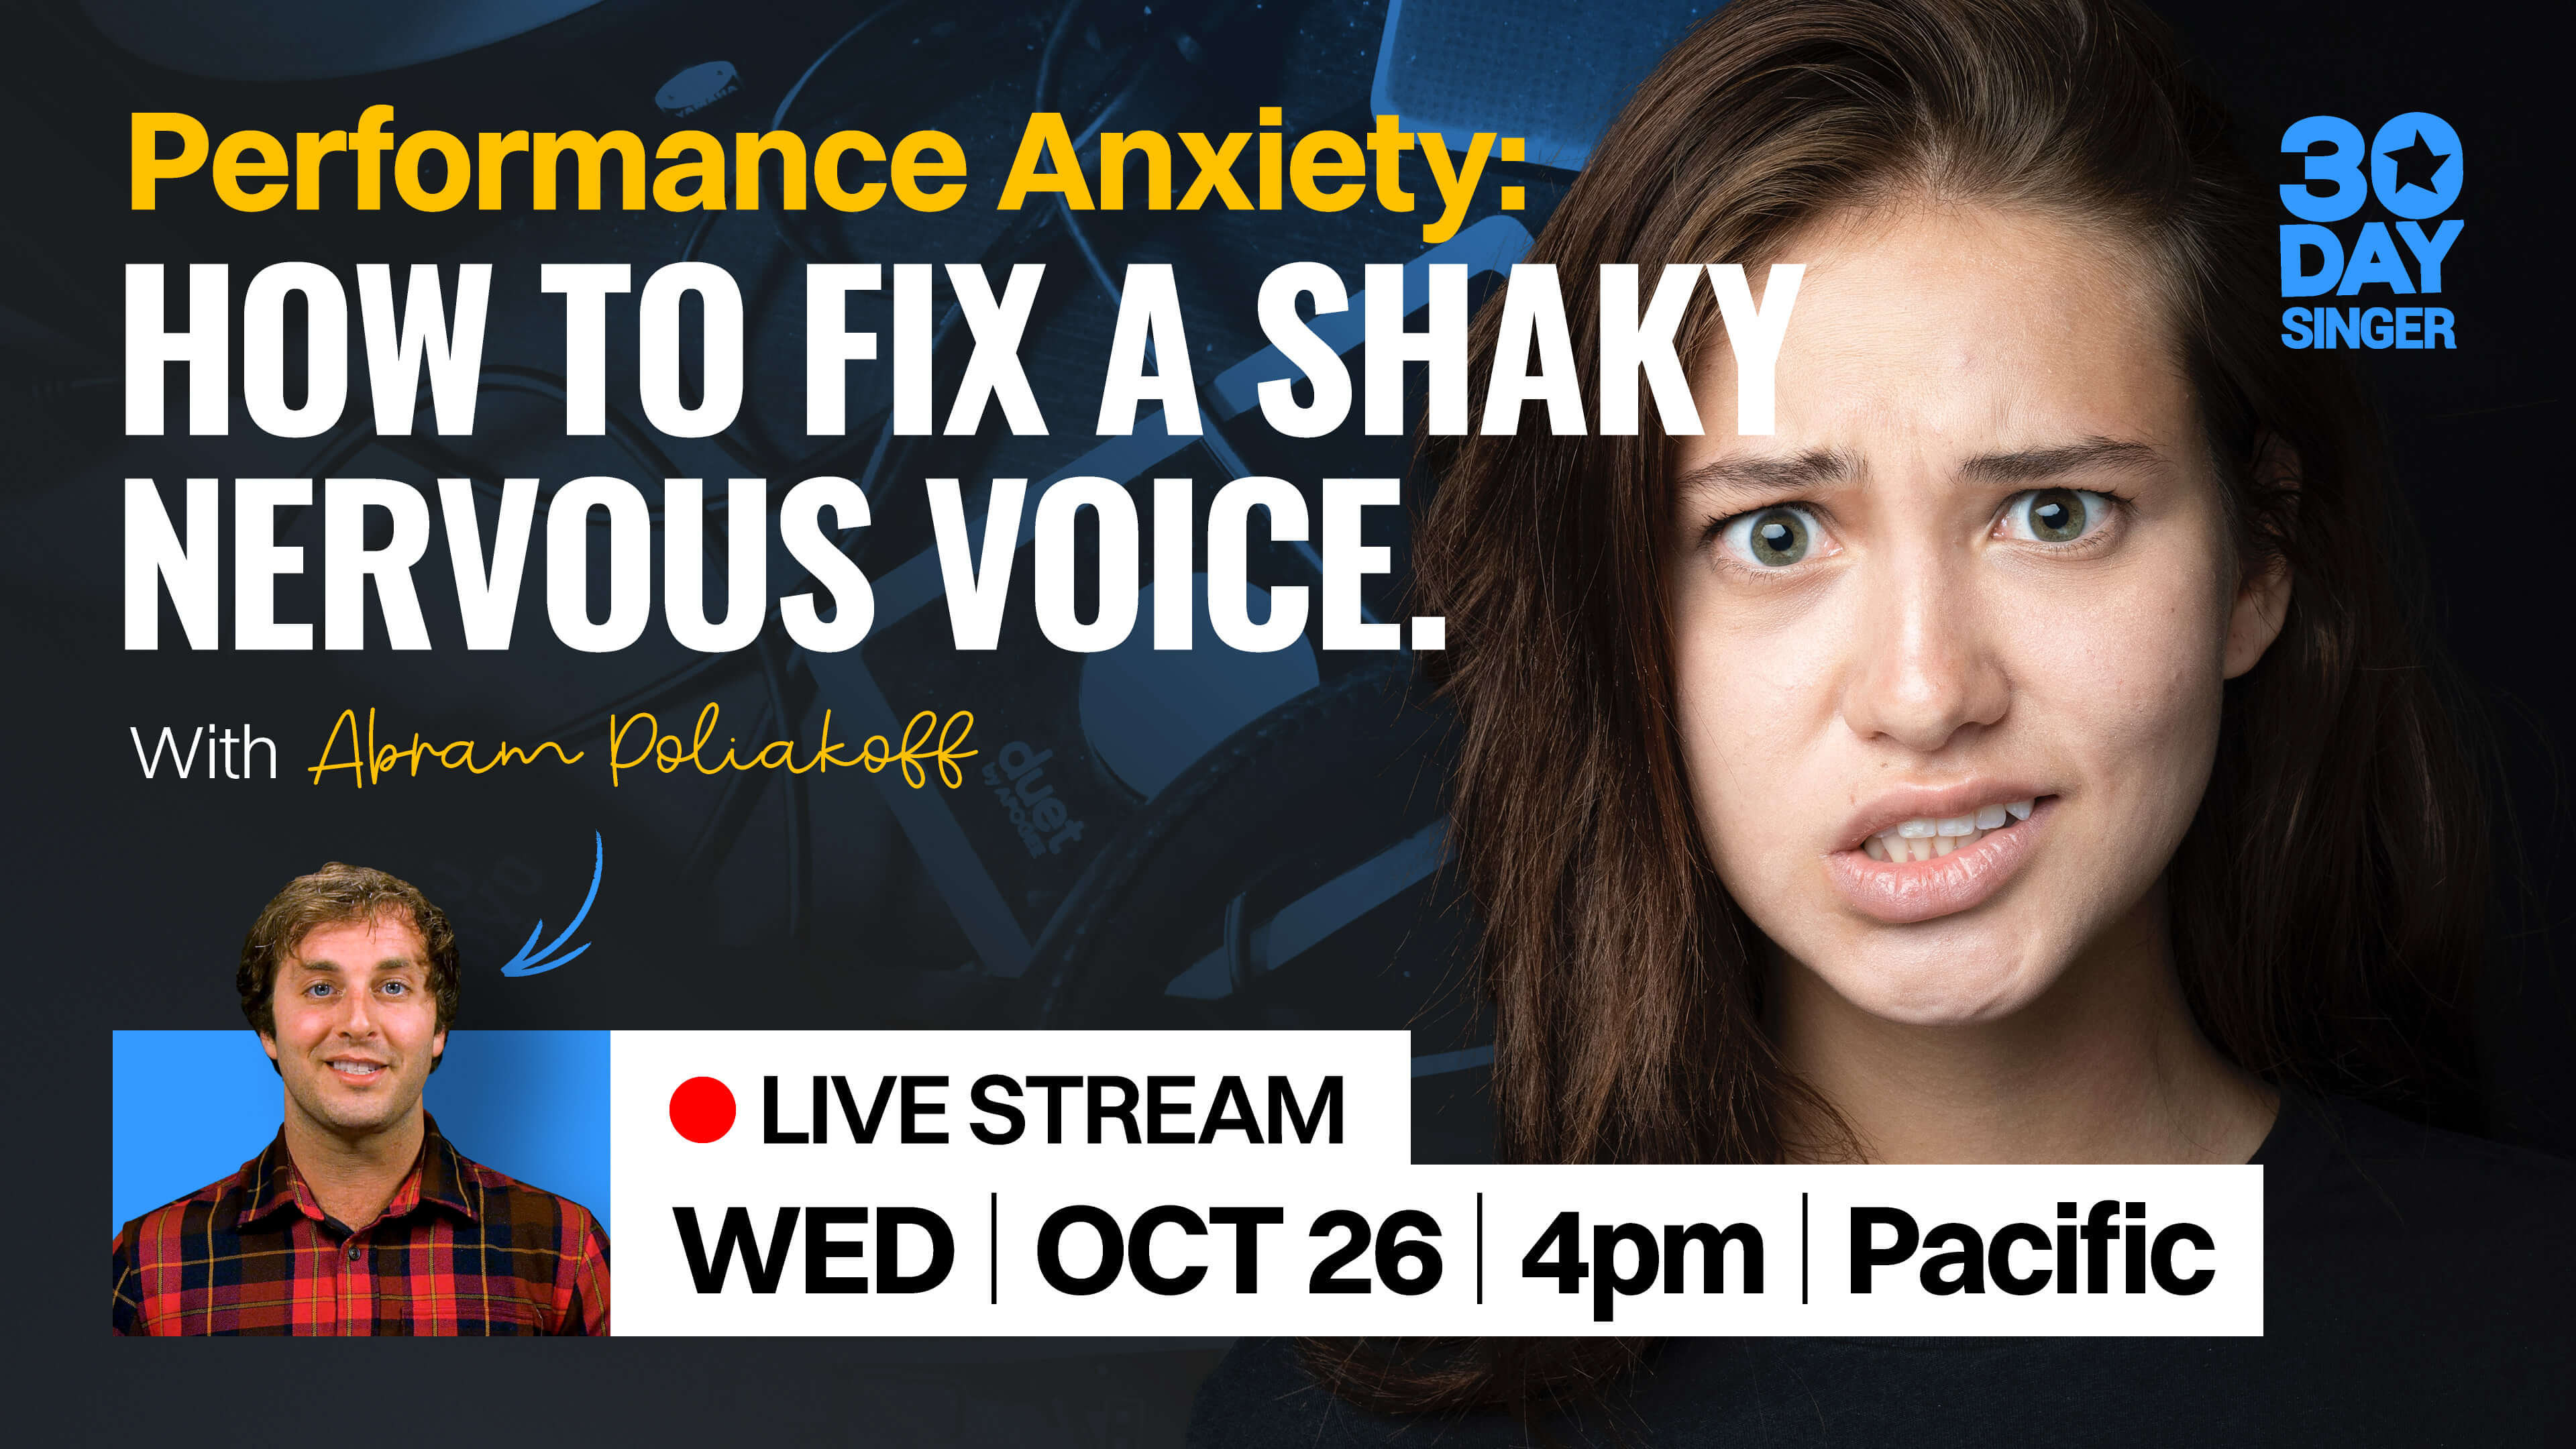 Performance Anxiety: How To Fix A Shaky Nervous Voice